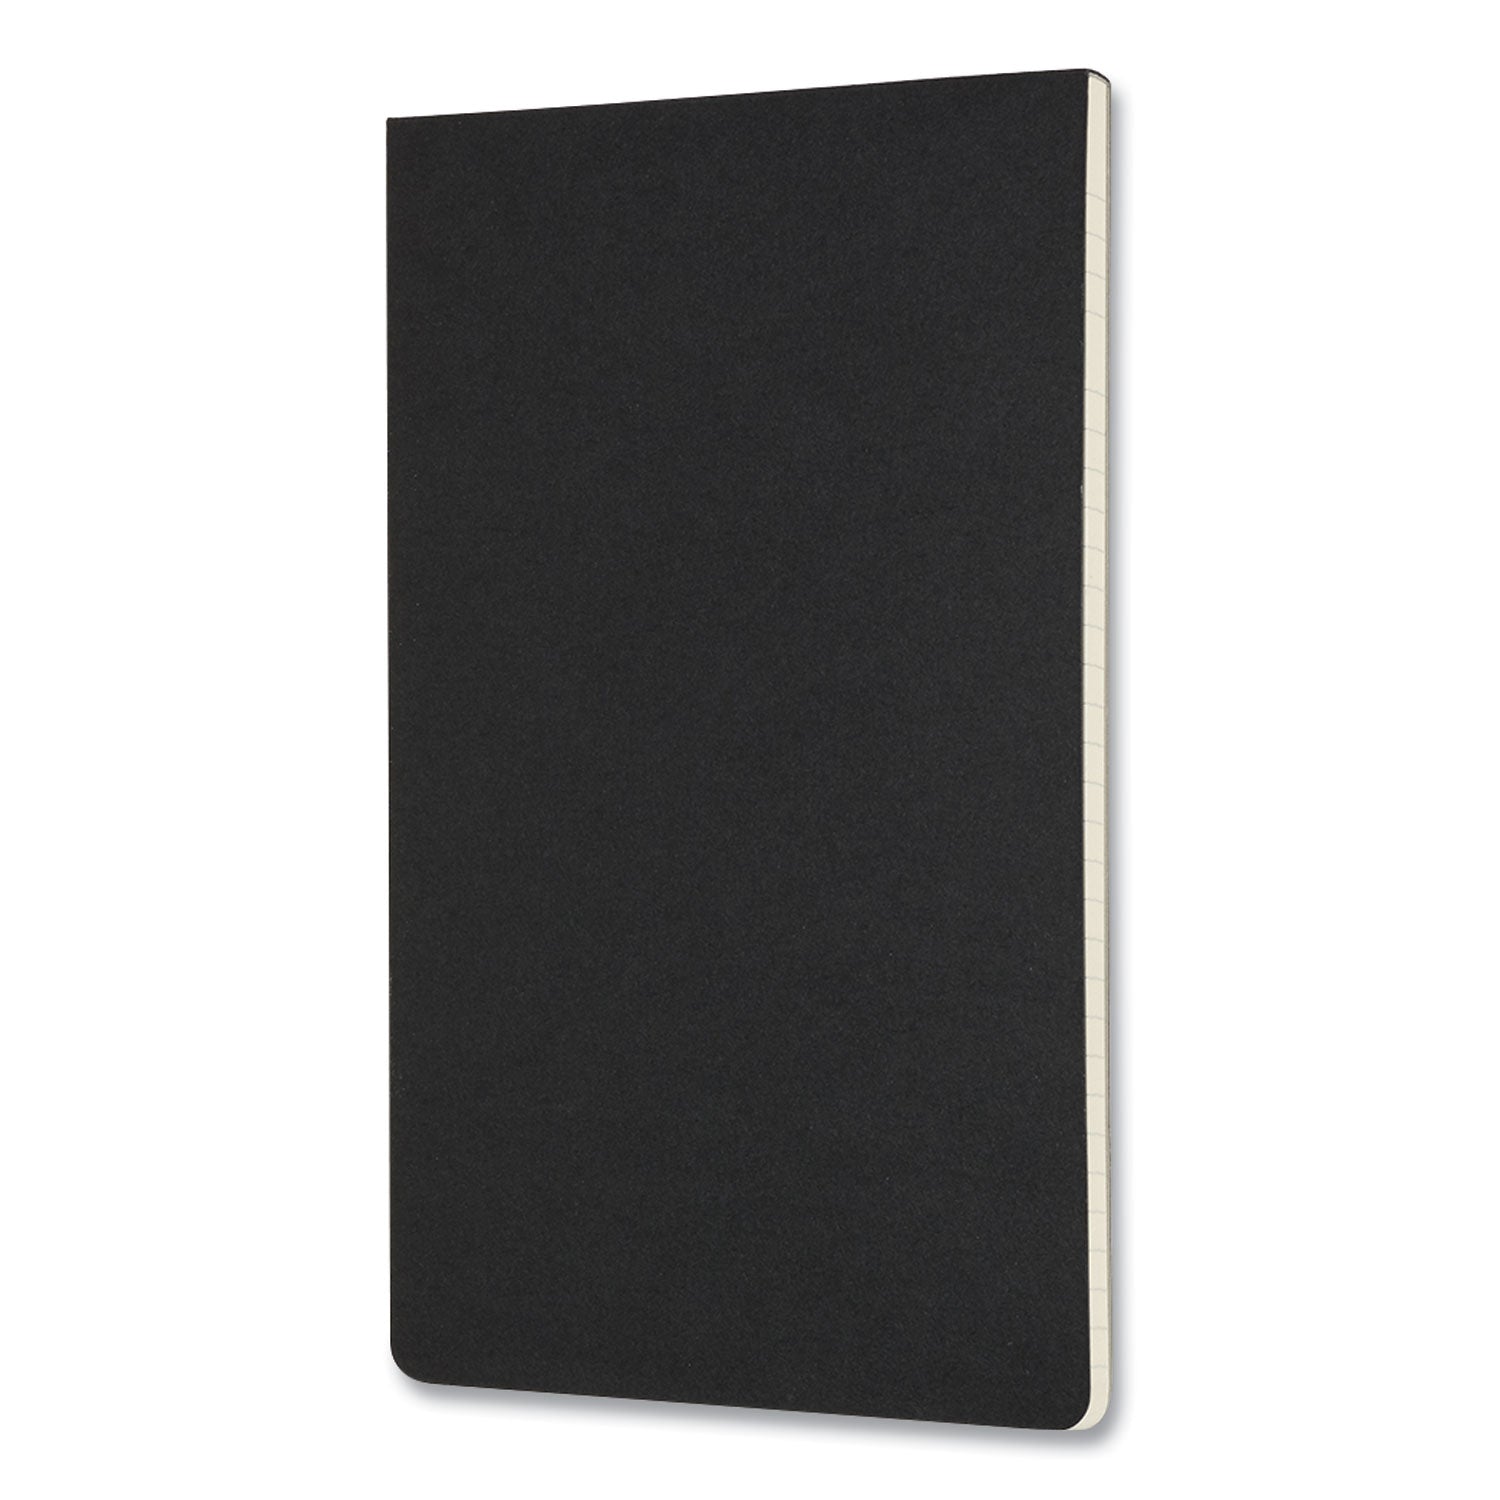 pro-pad-meeting-minutes-notes-format-black-cover-96-ivory-5-x-825-sheets_hbg620916 - 2